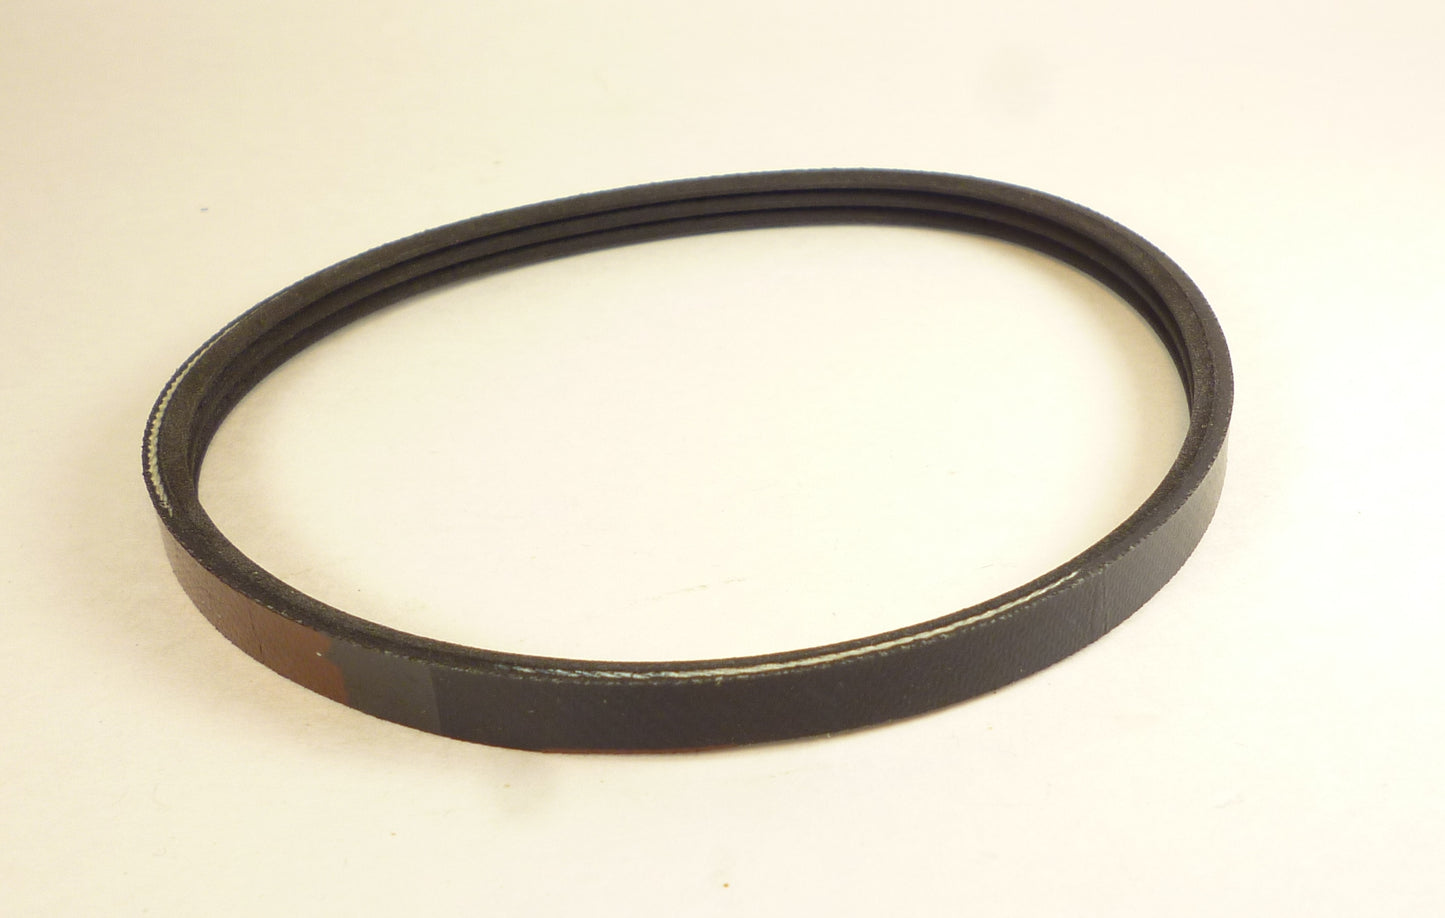 Harbor Freight Air Compressor Replacement Rubber Drive Belt Model # 62511